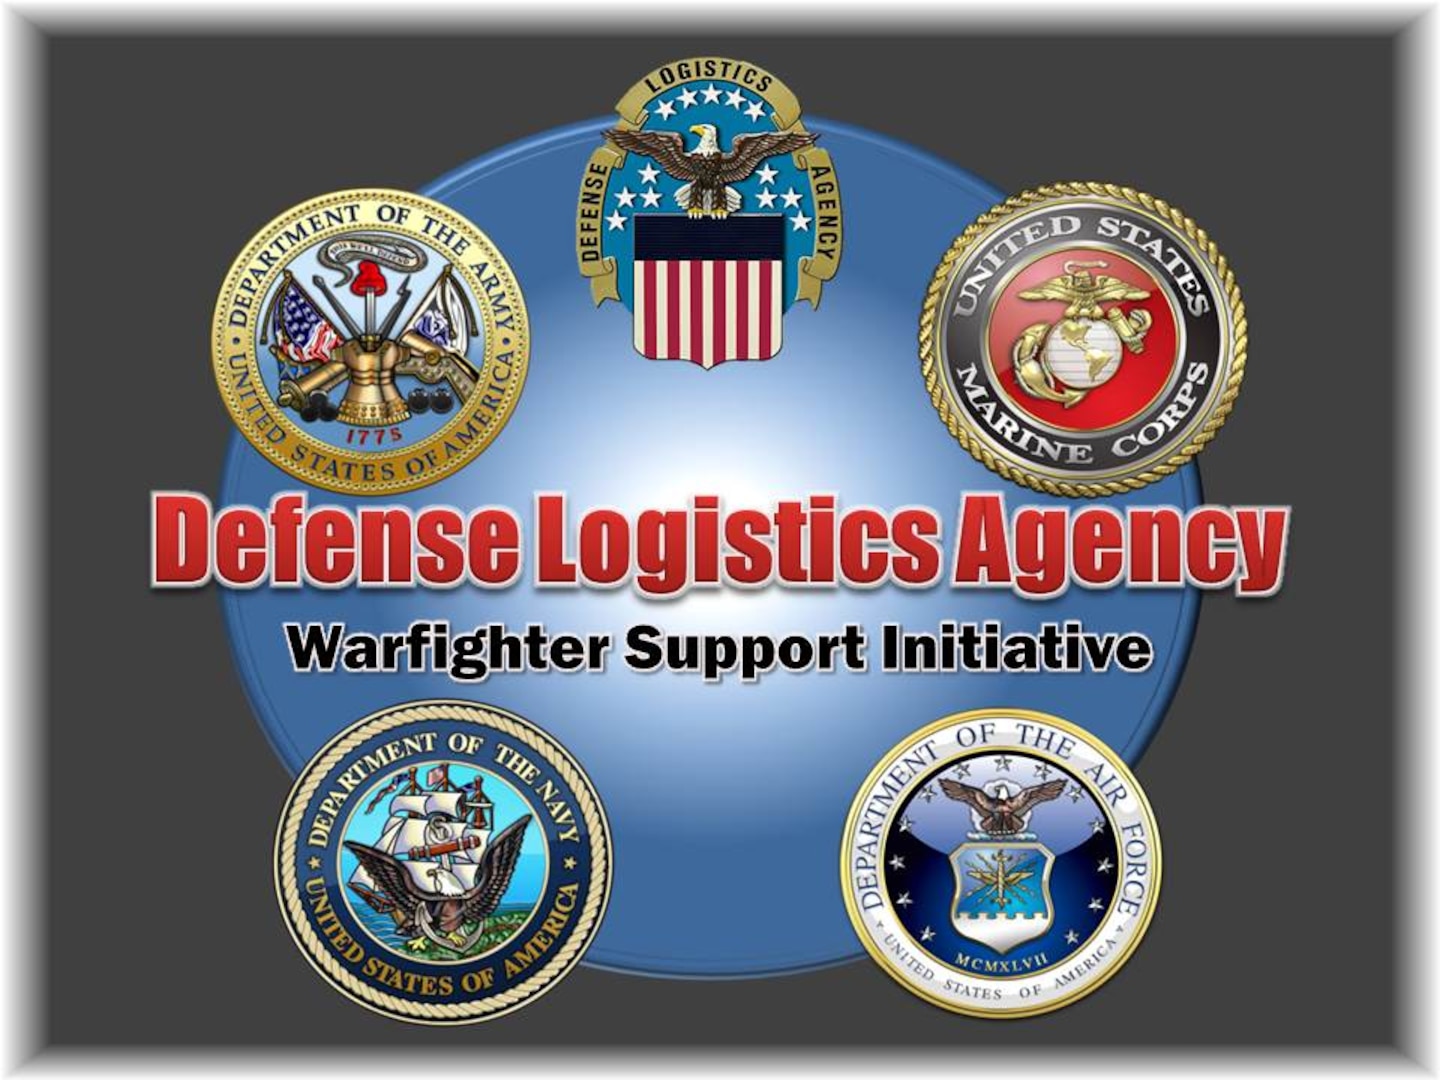 DLA current and future customers are invited to join in the Warfighter Support Initiative March 22-23 at Fort Bragg, North Carolina.